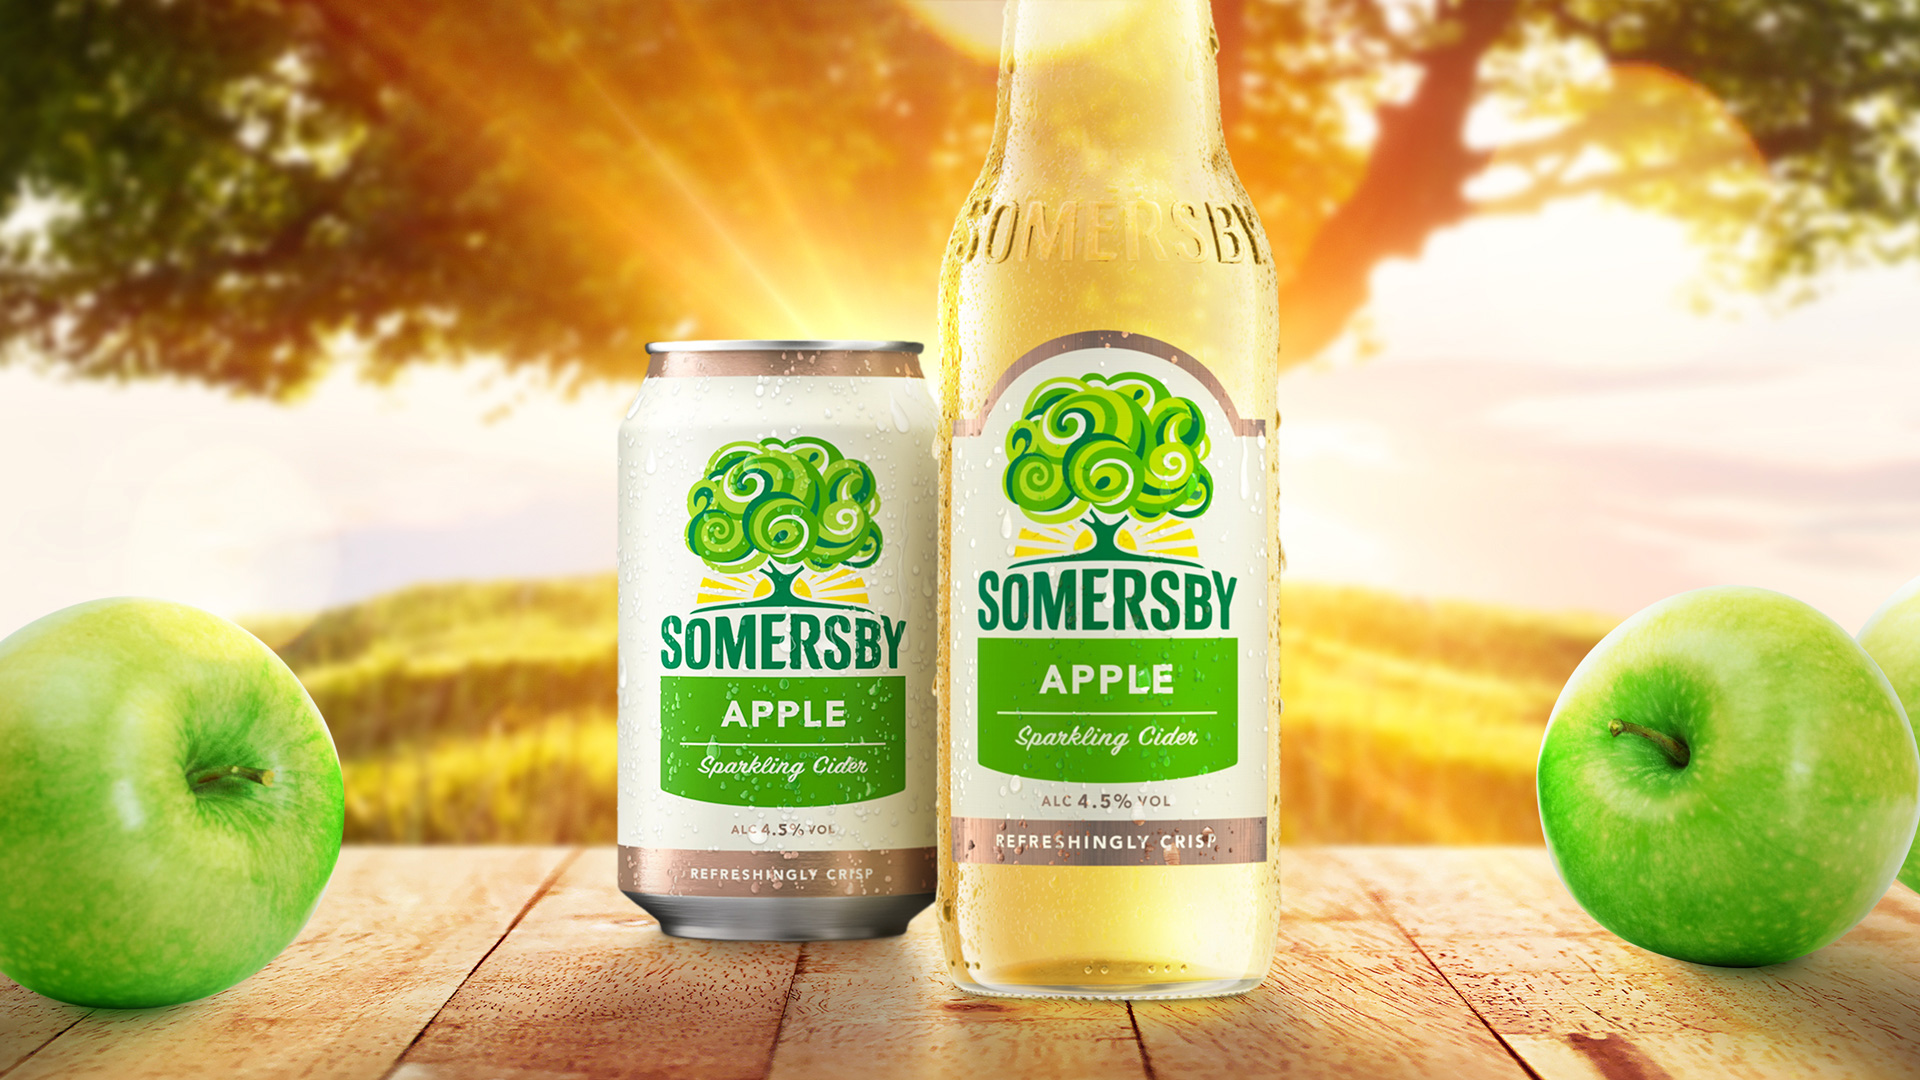 New Logo and Packaging for Somersby by Elmwood